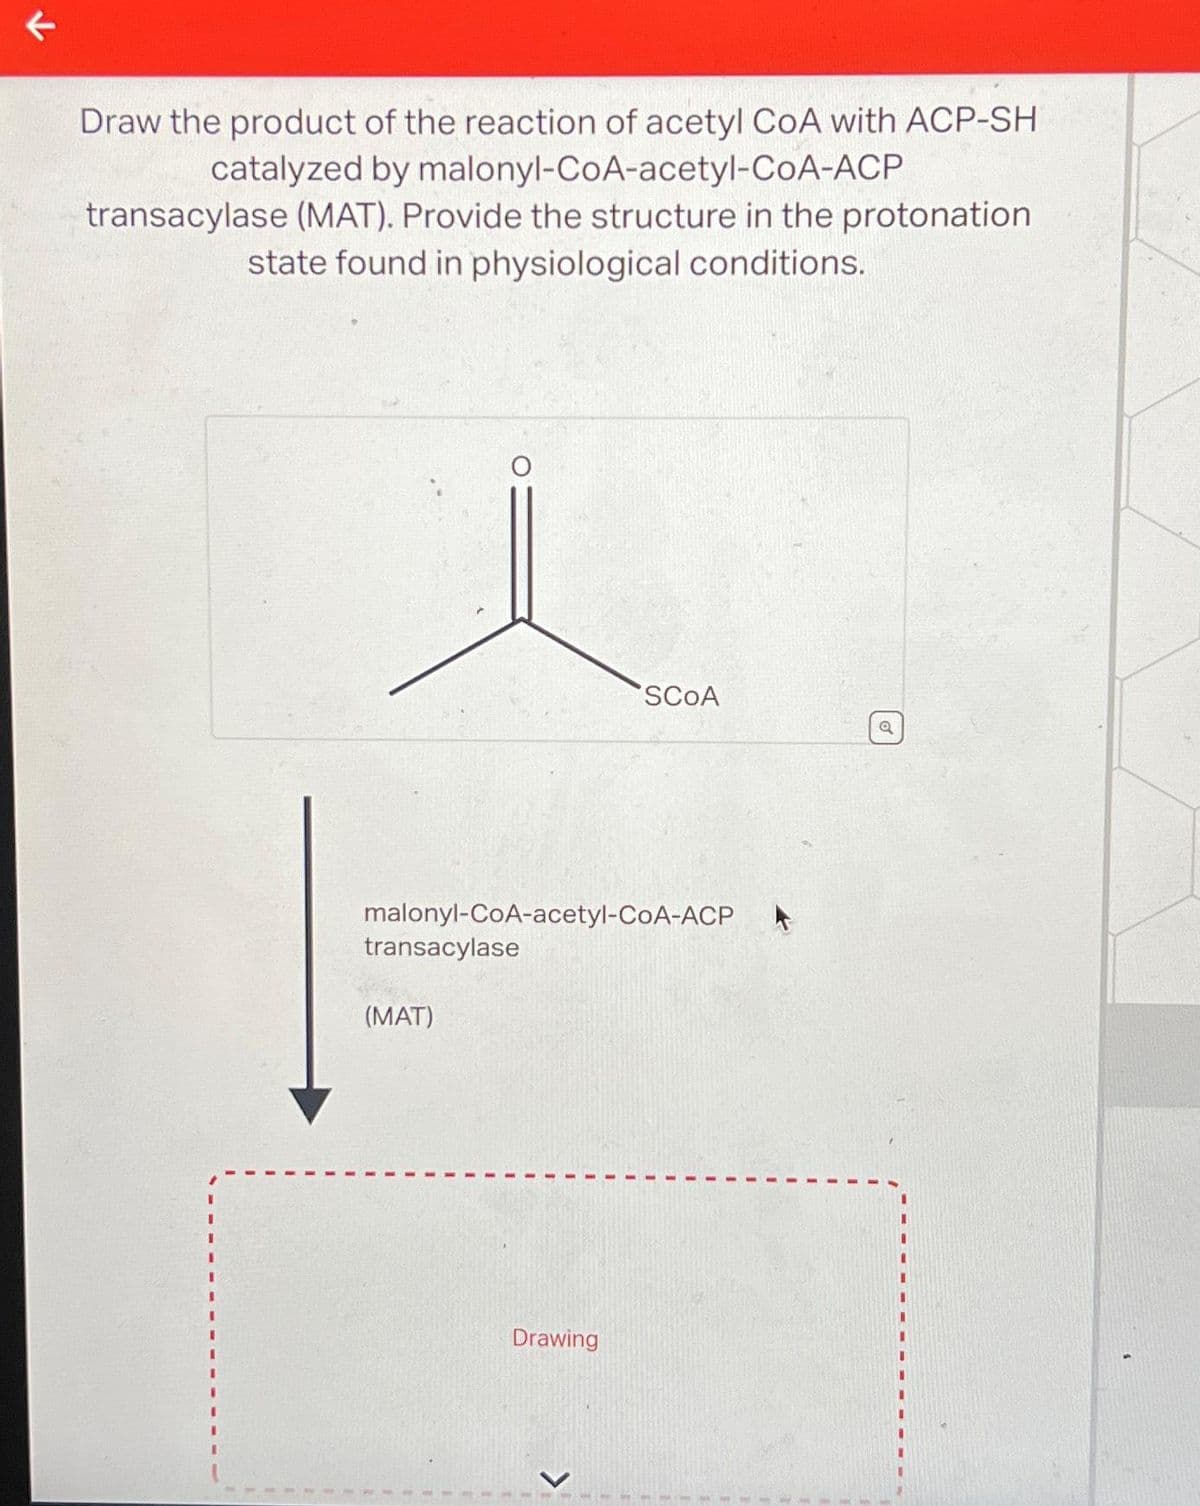 K
Draw the product of the reaction of acetyl CoA with ACP-SHI
catalyzed by malonyl-CoA-acetyl-CoA-ACP
transacylase (MAT). Provide the structure in the protonation
state found in physiological conditions.
malonyl-CoA-acetyl-CoA-ACP
transacylase
(MAT)
SCOA
Drawing
Q